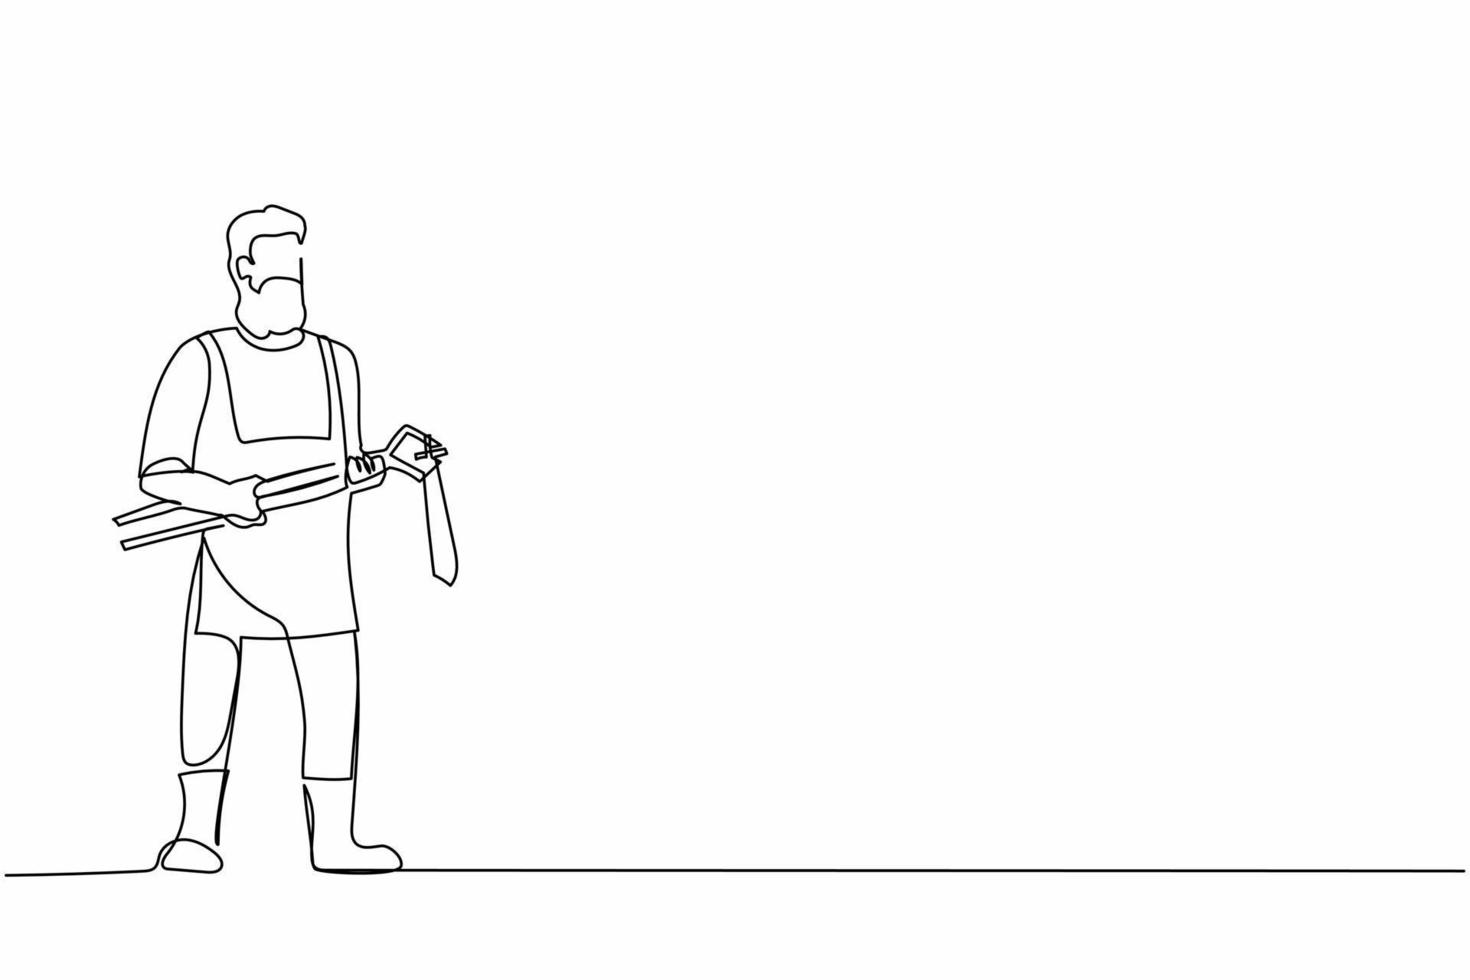 Single one line drawing bearded blacksmith wearing apron standing holding hot blade forged with pliers and tongs. Craftsman making swords and shields. Continuous line draw design vector illustration